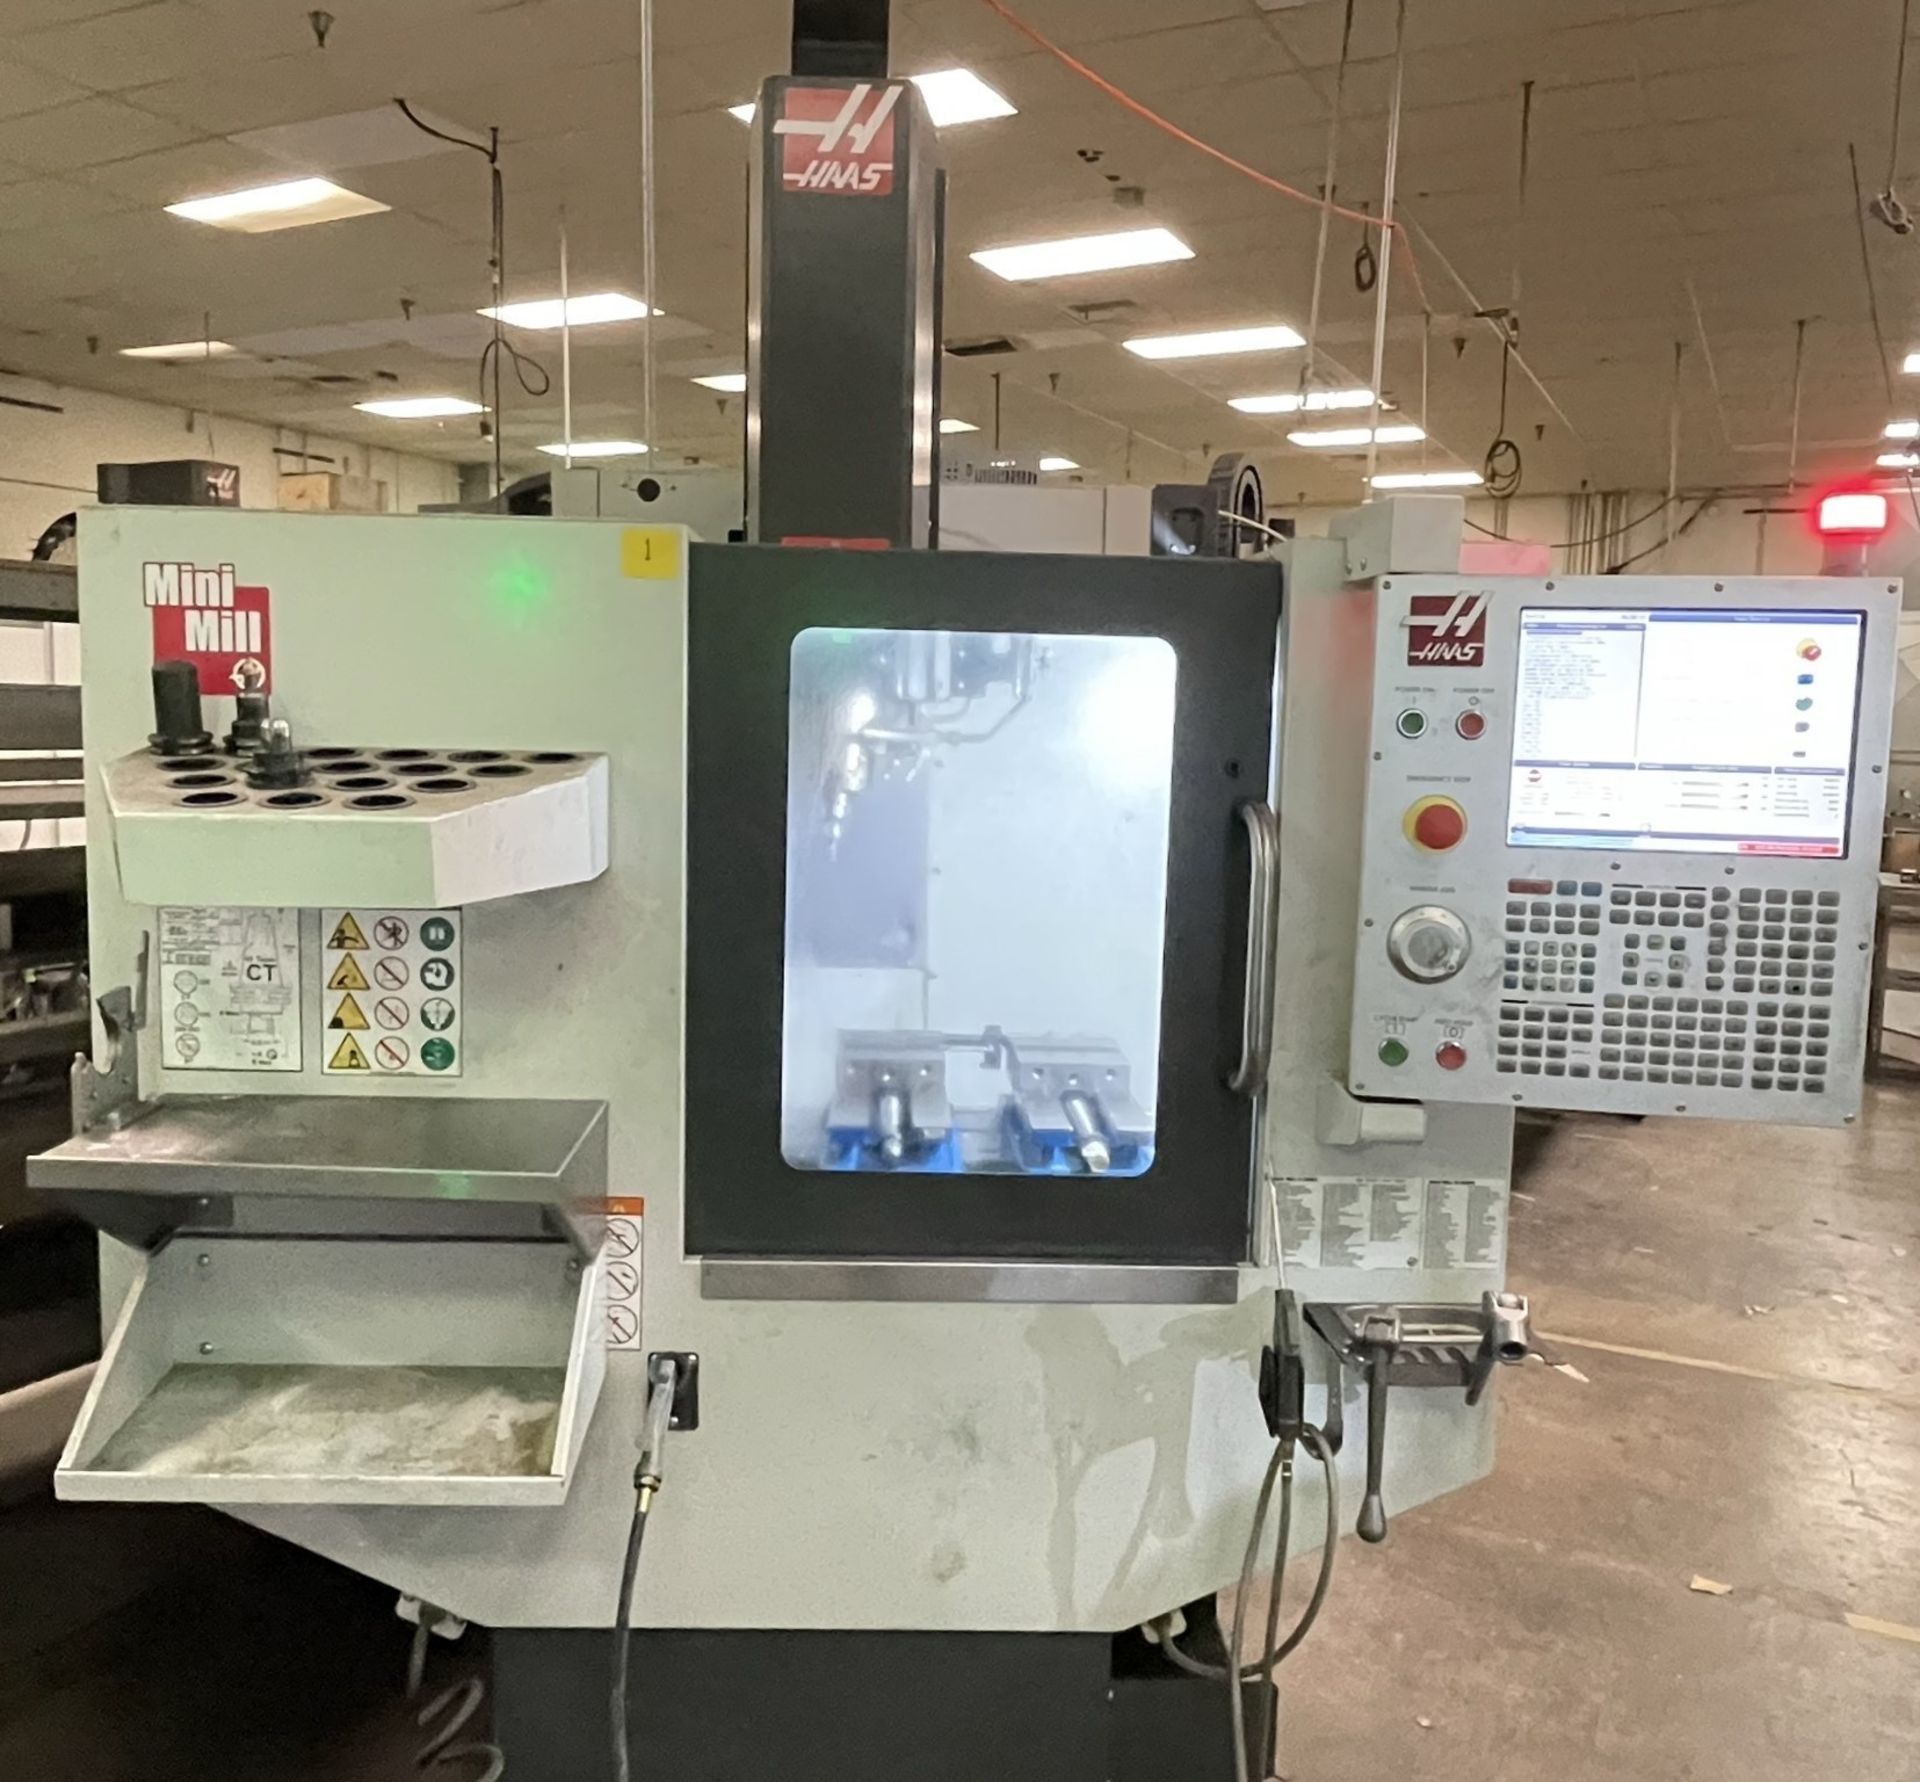 HAAS Mini Mill CNC Vertical Machining Center, Late Model, Low Hours, New 2019 *Off-Site*